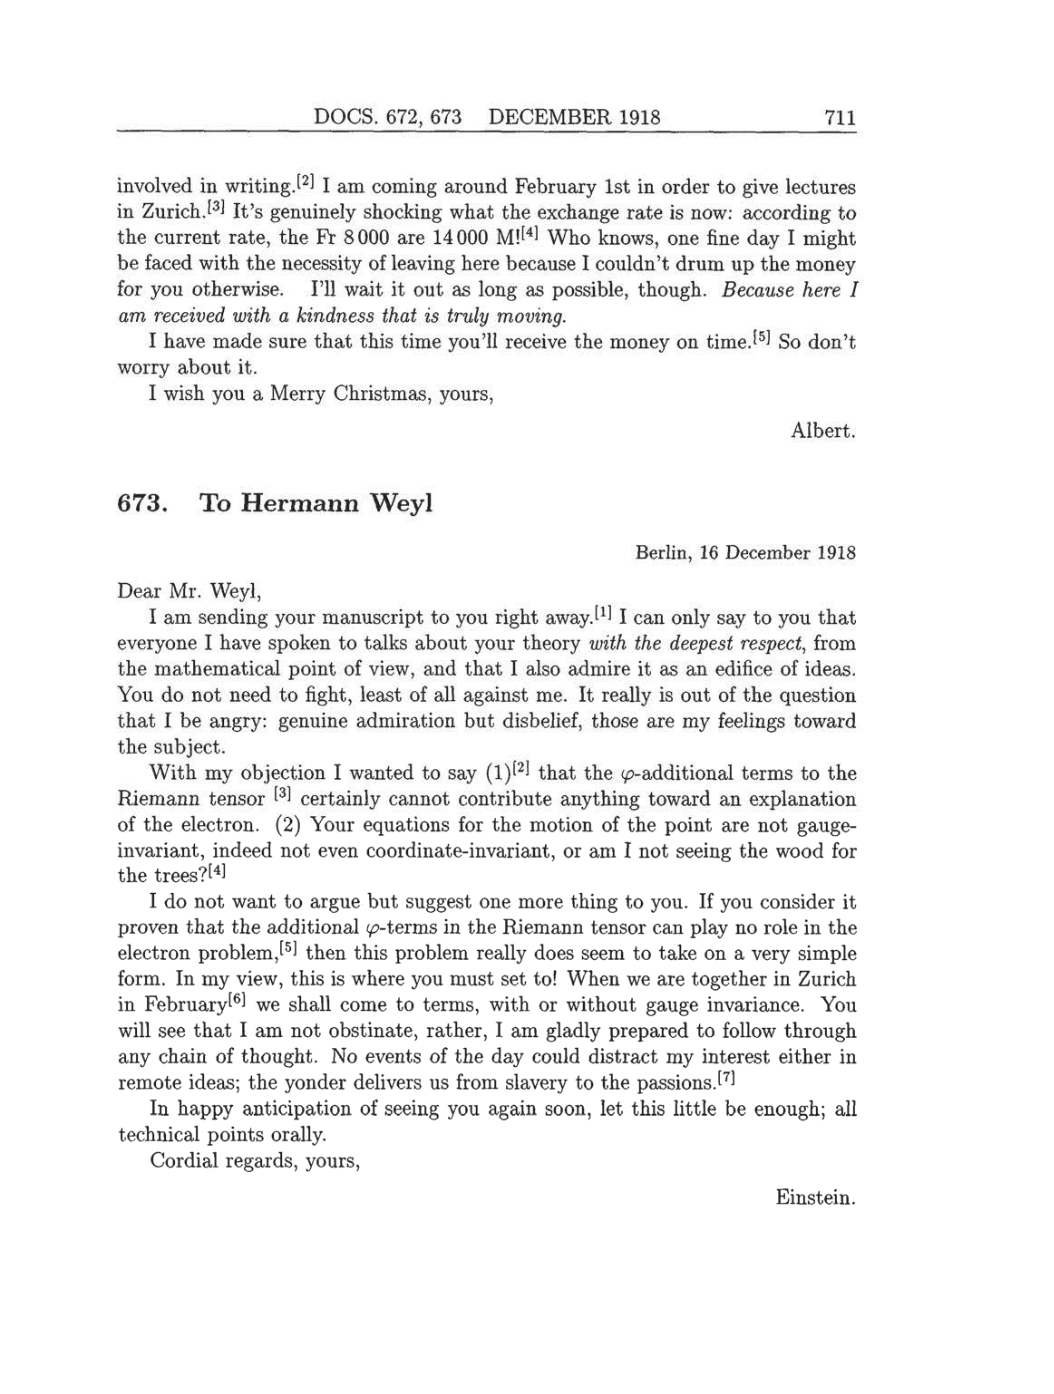 Volume 8: The Berlin Years: Correspondence, 1914-1918 (English translation supplement) page 3